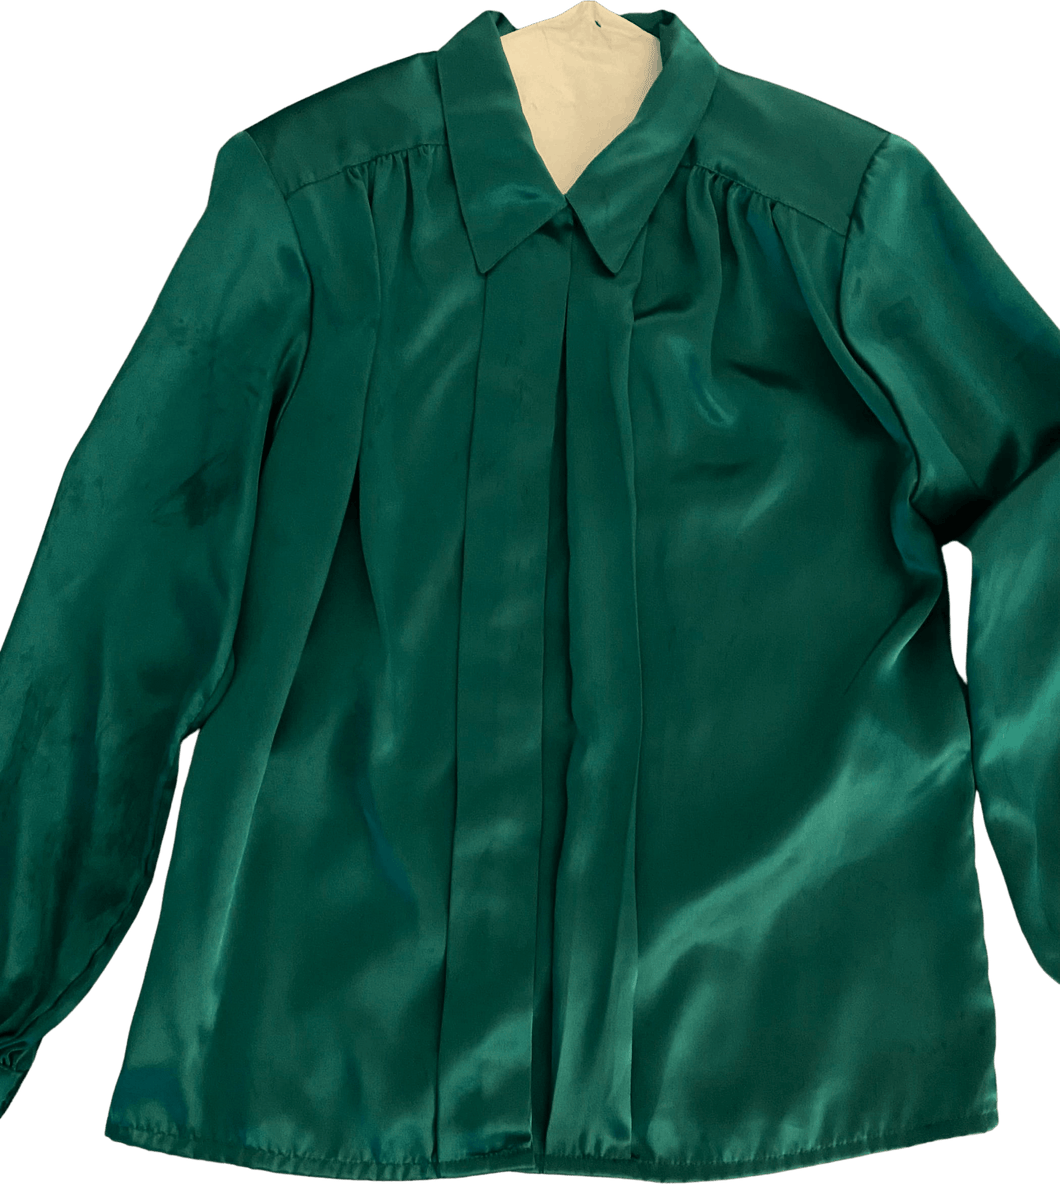 80’s Impressions Emerald Green Silky Blouse by impressions of California